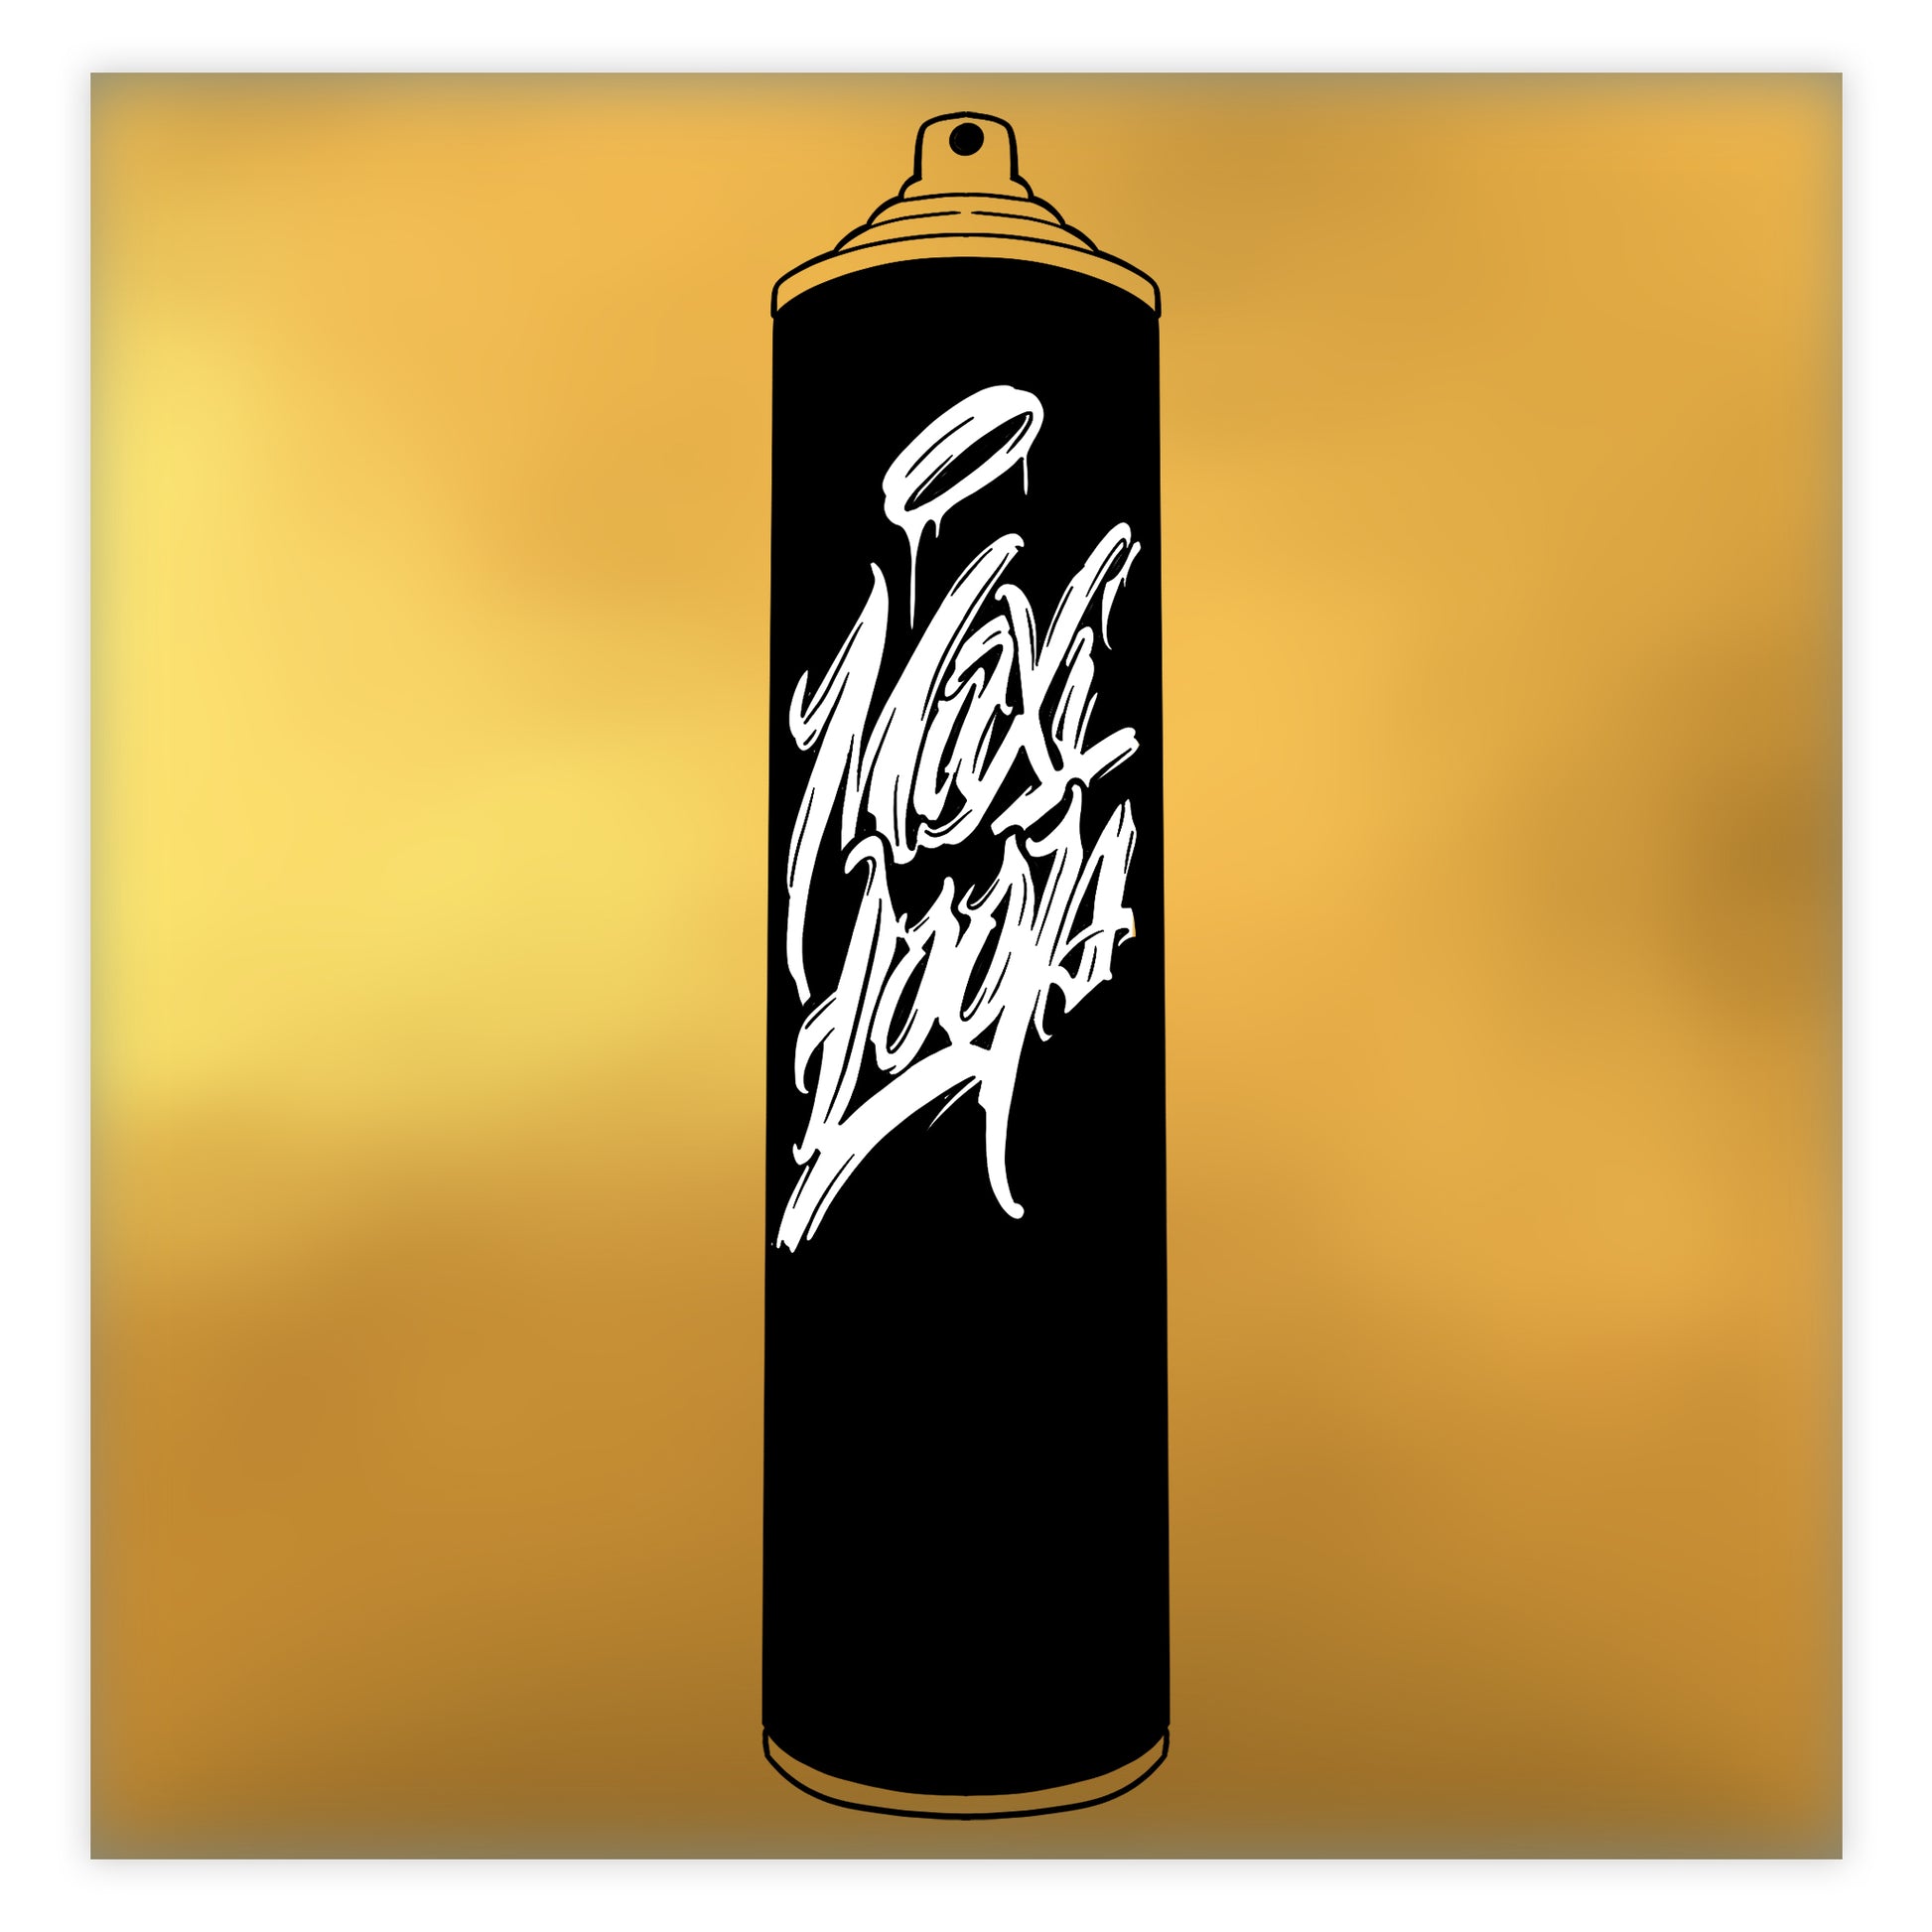 Loop maxi artist spray paint in color gold.